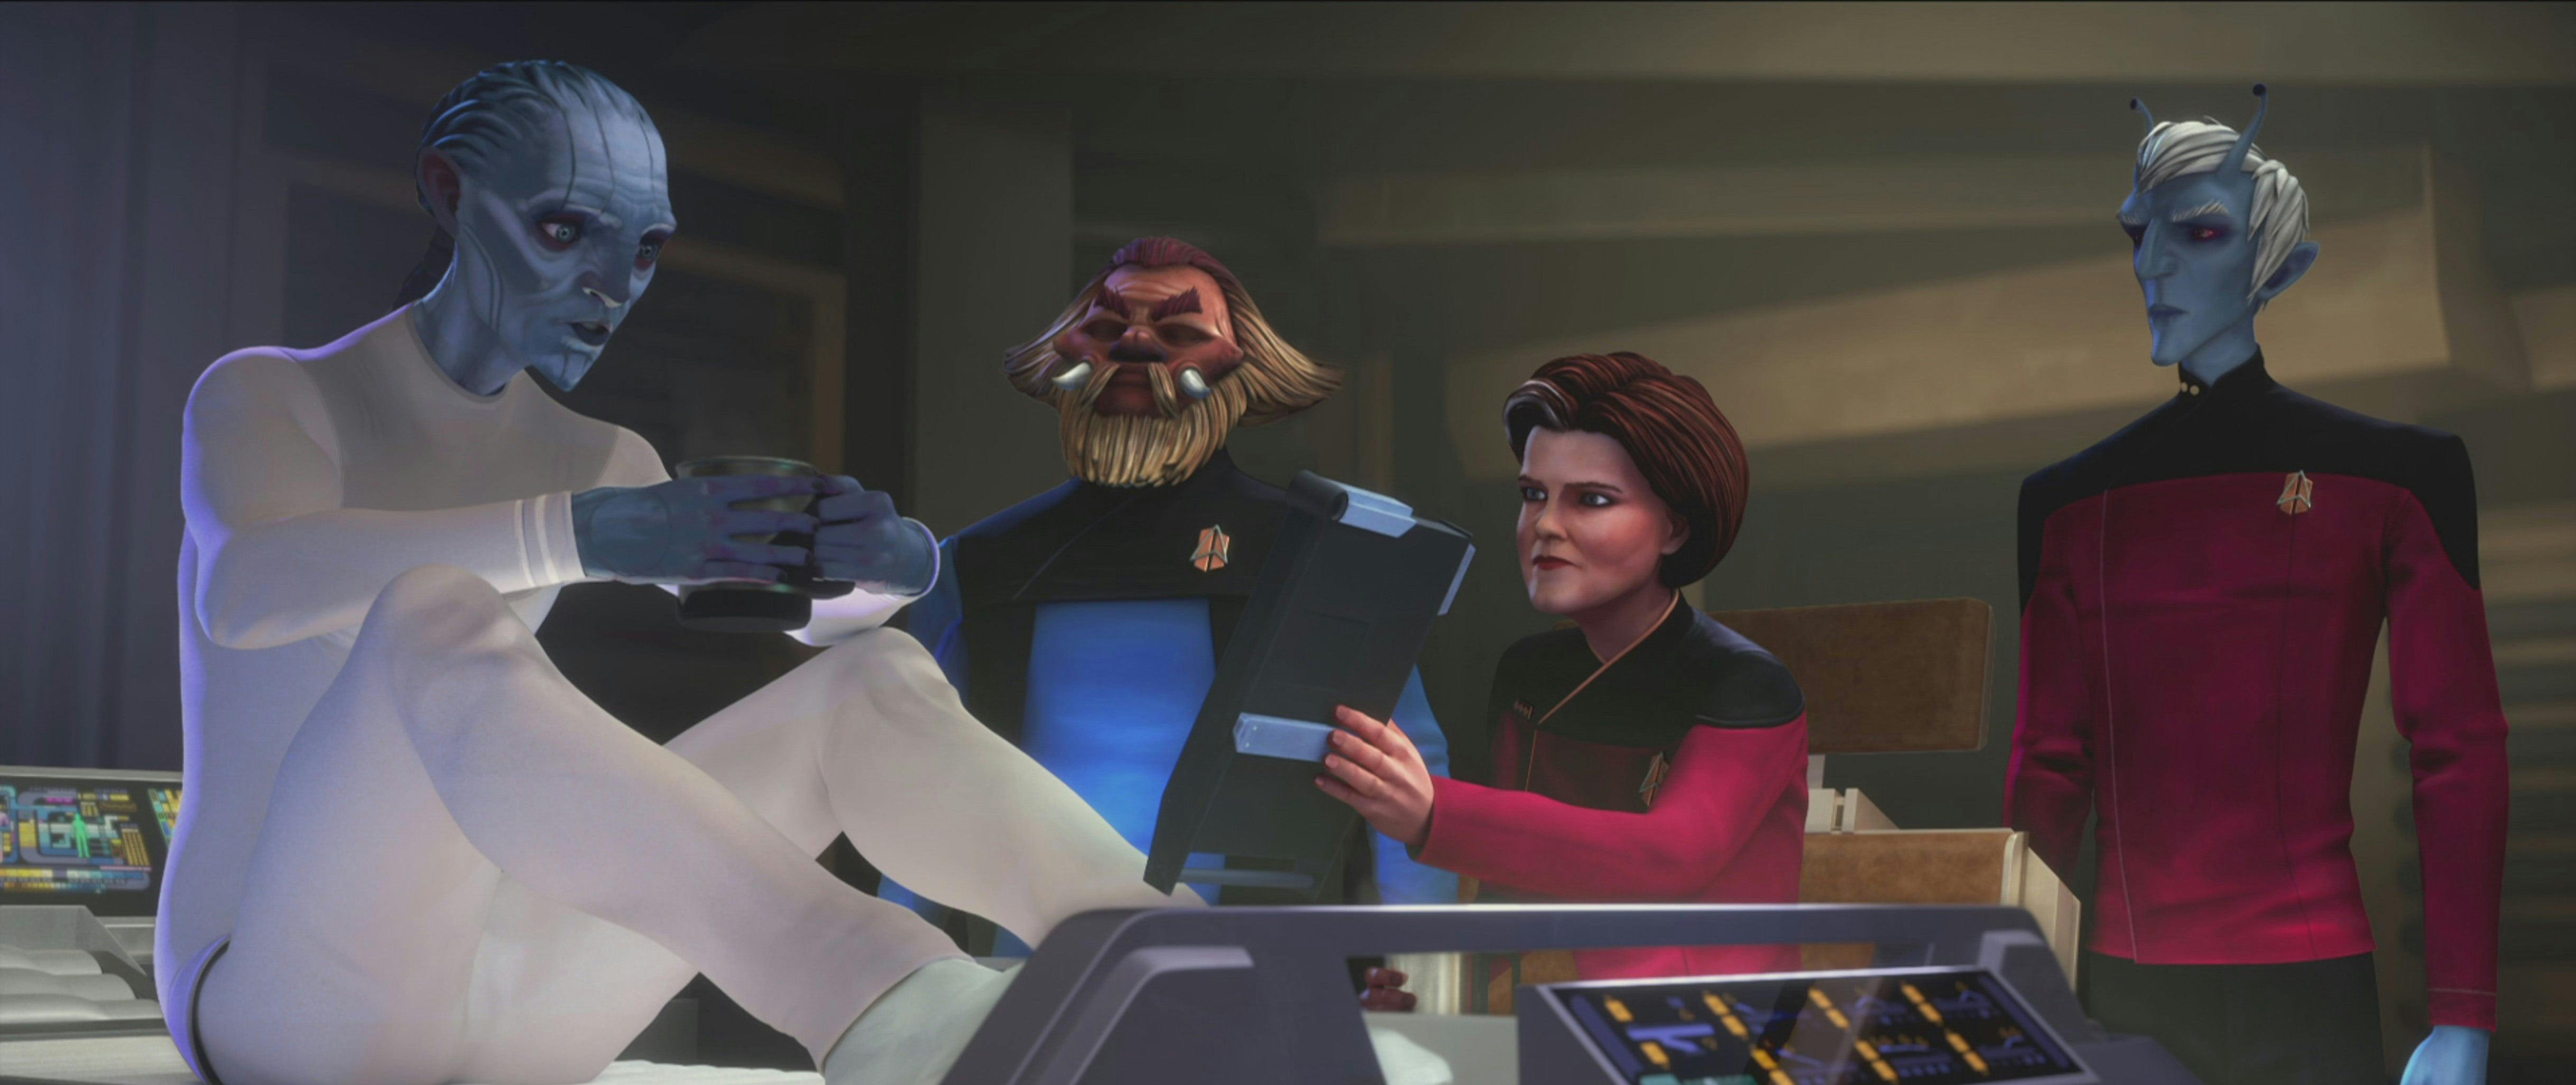 Admiral Janeway and her crew speak to the Diviner.